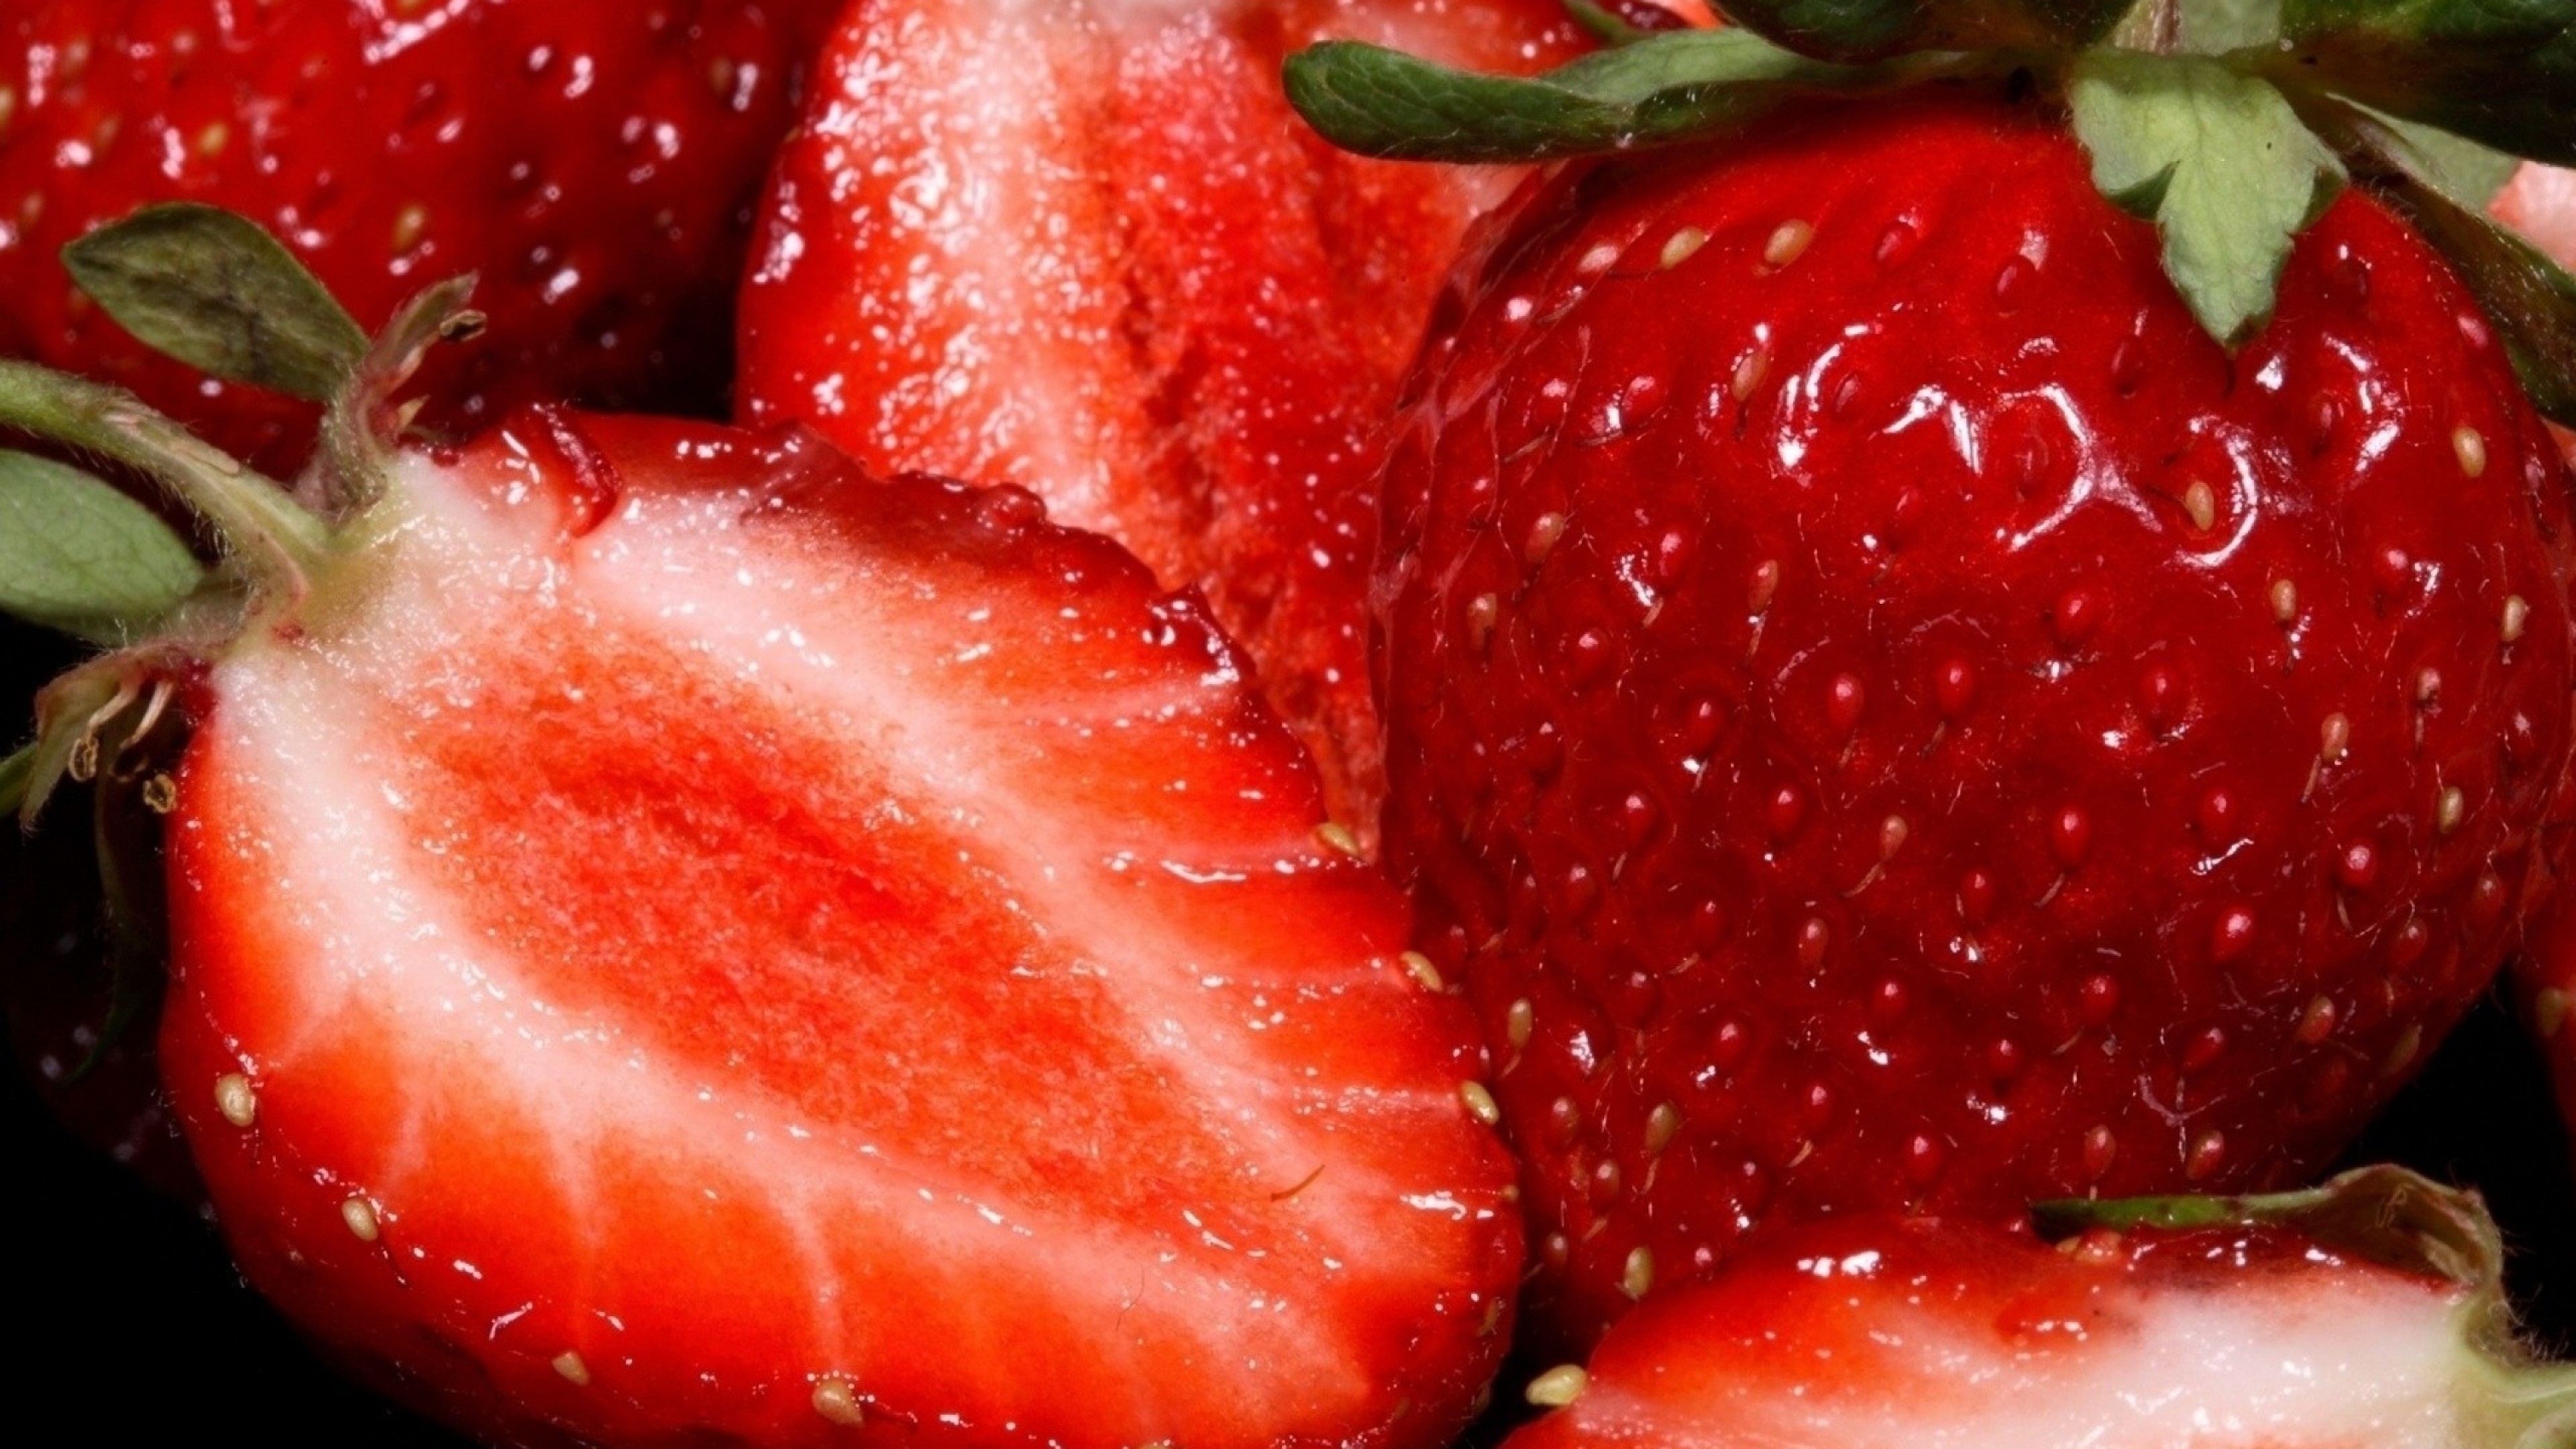 Strawberry: Characteristic aroma, bright red color, juicy texture, and sweetness. 3840x2160 4K Wallpaper.